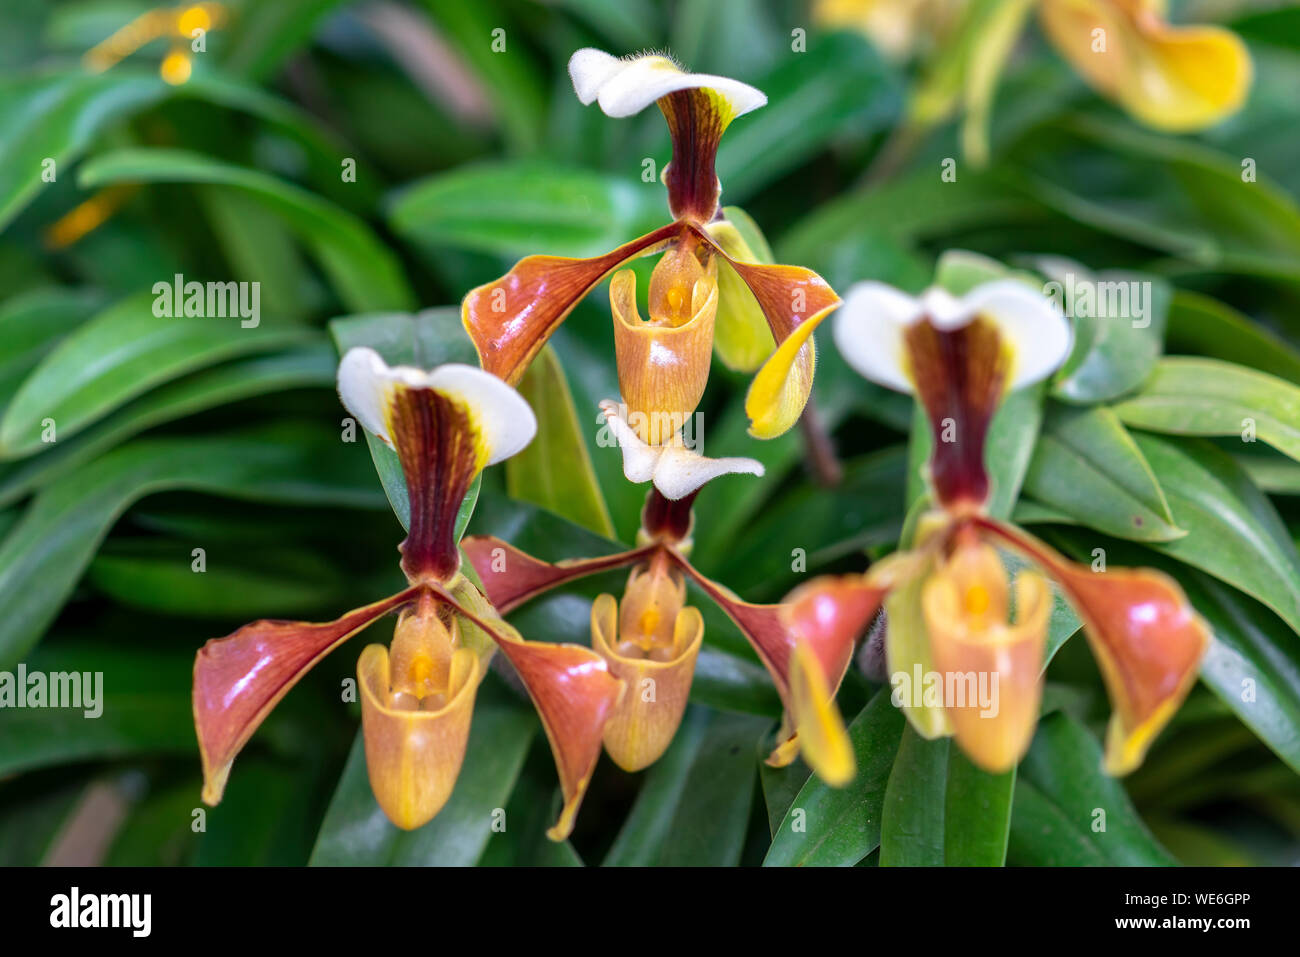 Paphiopedilum orchids flowers bloom in spring adorn the beauty of nature Stock Photo